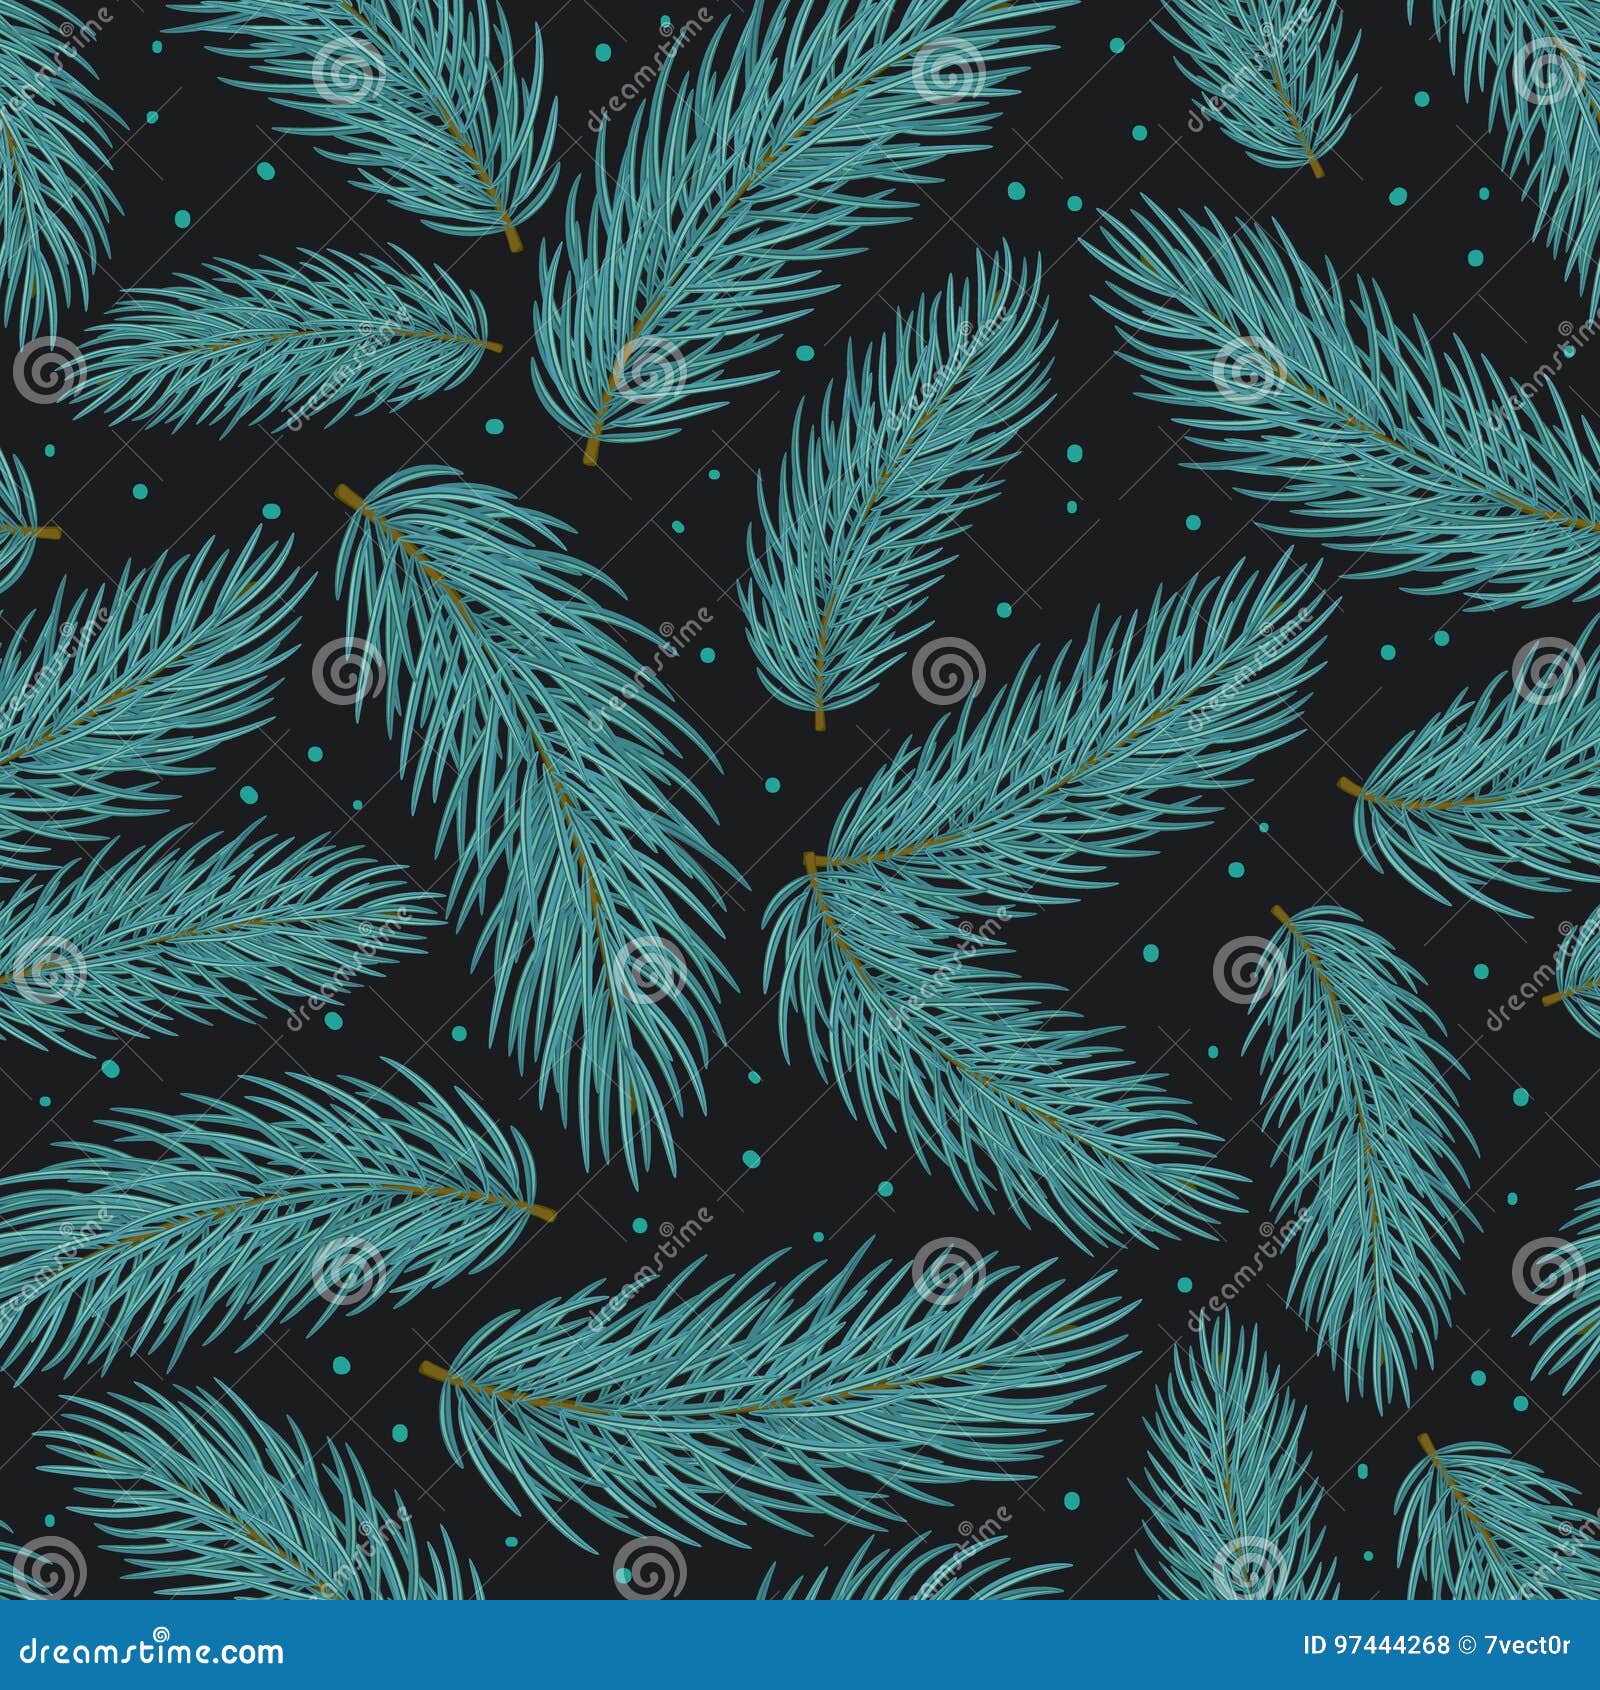 winter seamless pattern with conifer blue pine tree branches